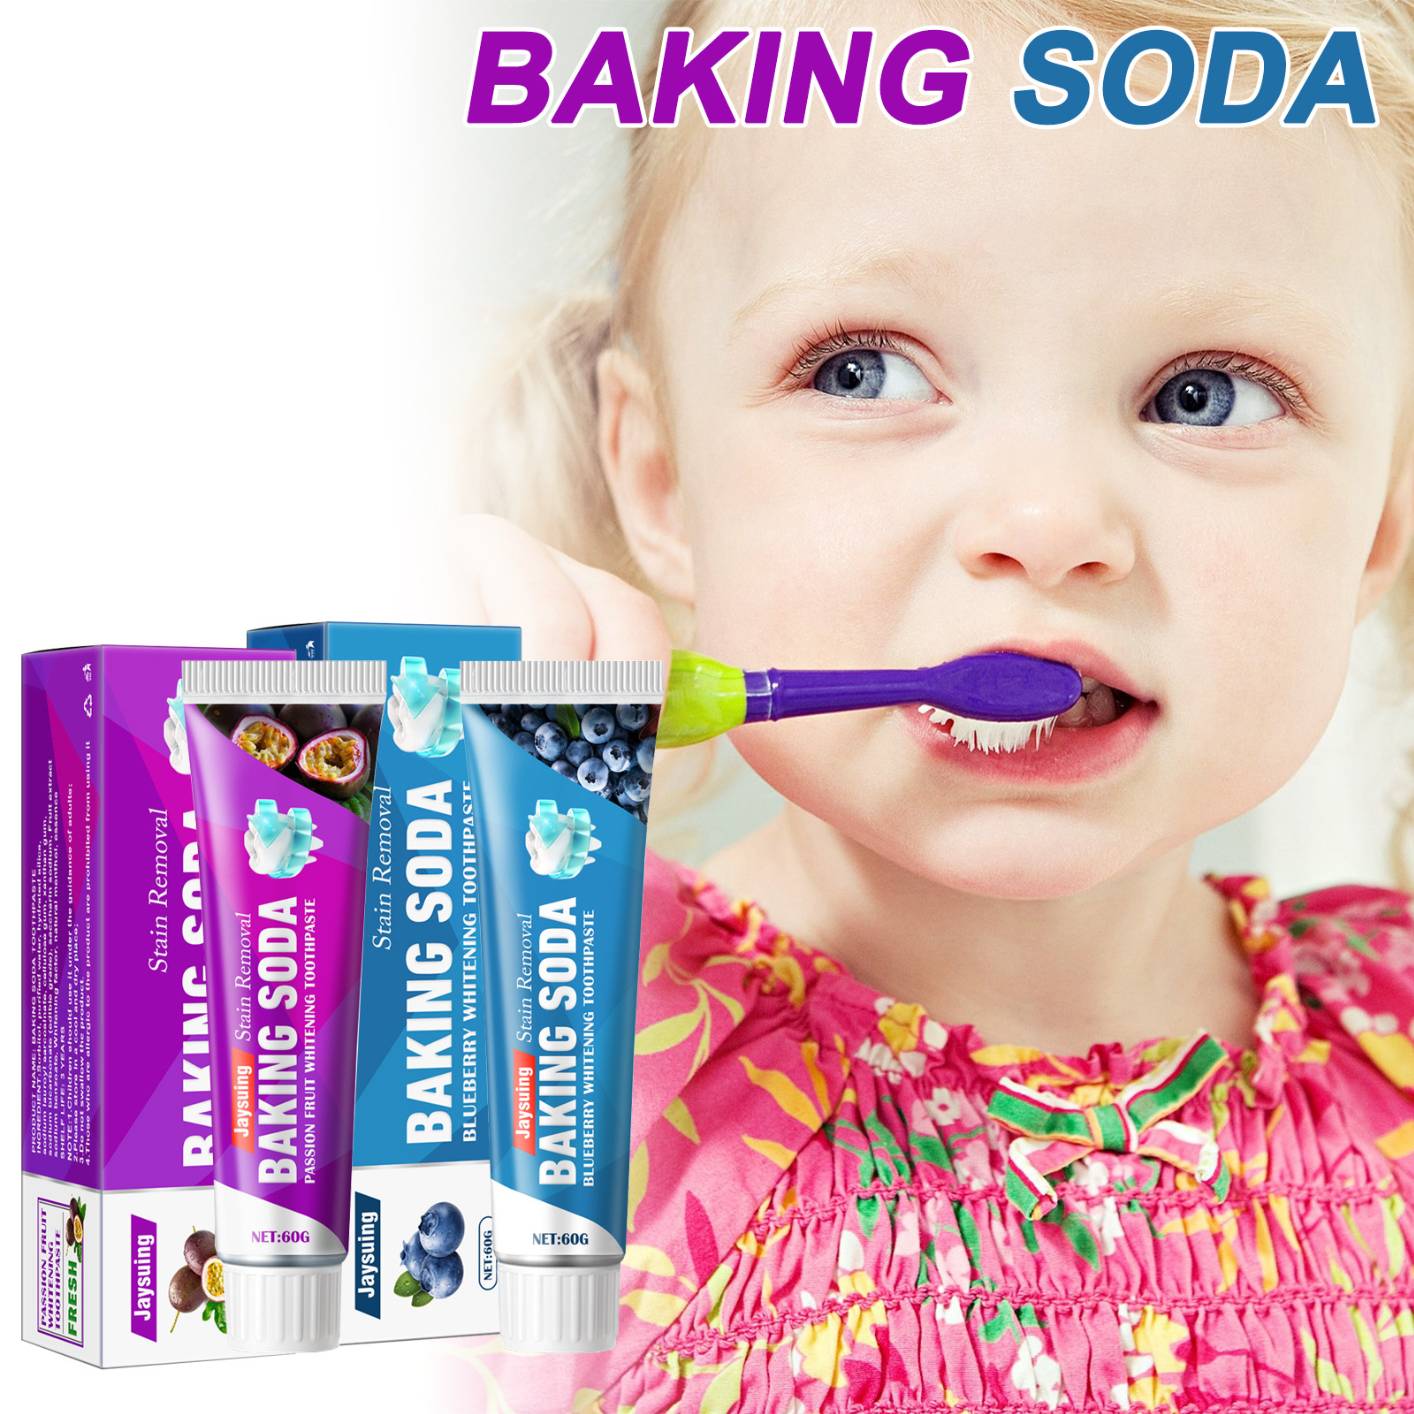 60ml Baking Soda Cleansing Toothpaste, Intensive Stain Removal Toothpaste, Travel Friendly, Easy to Use, Oral Care